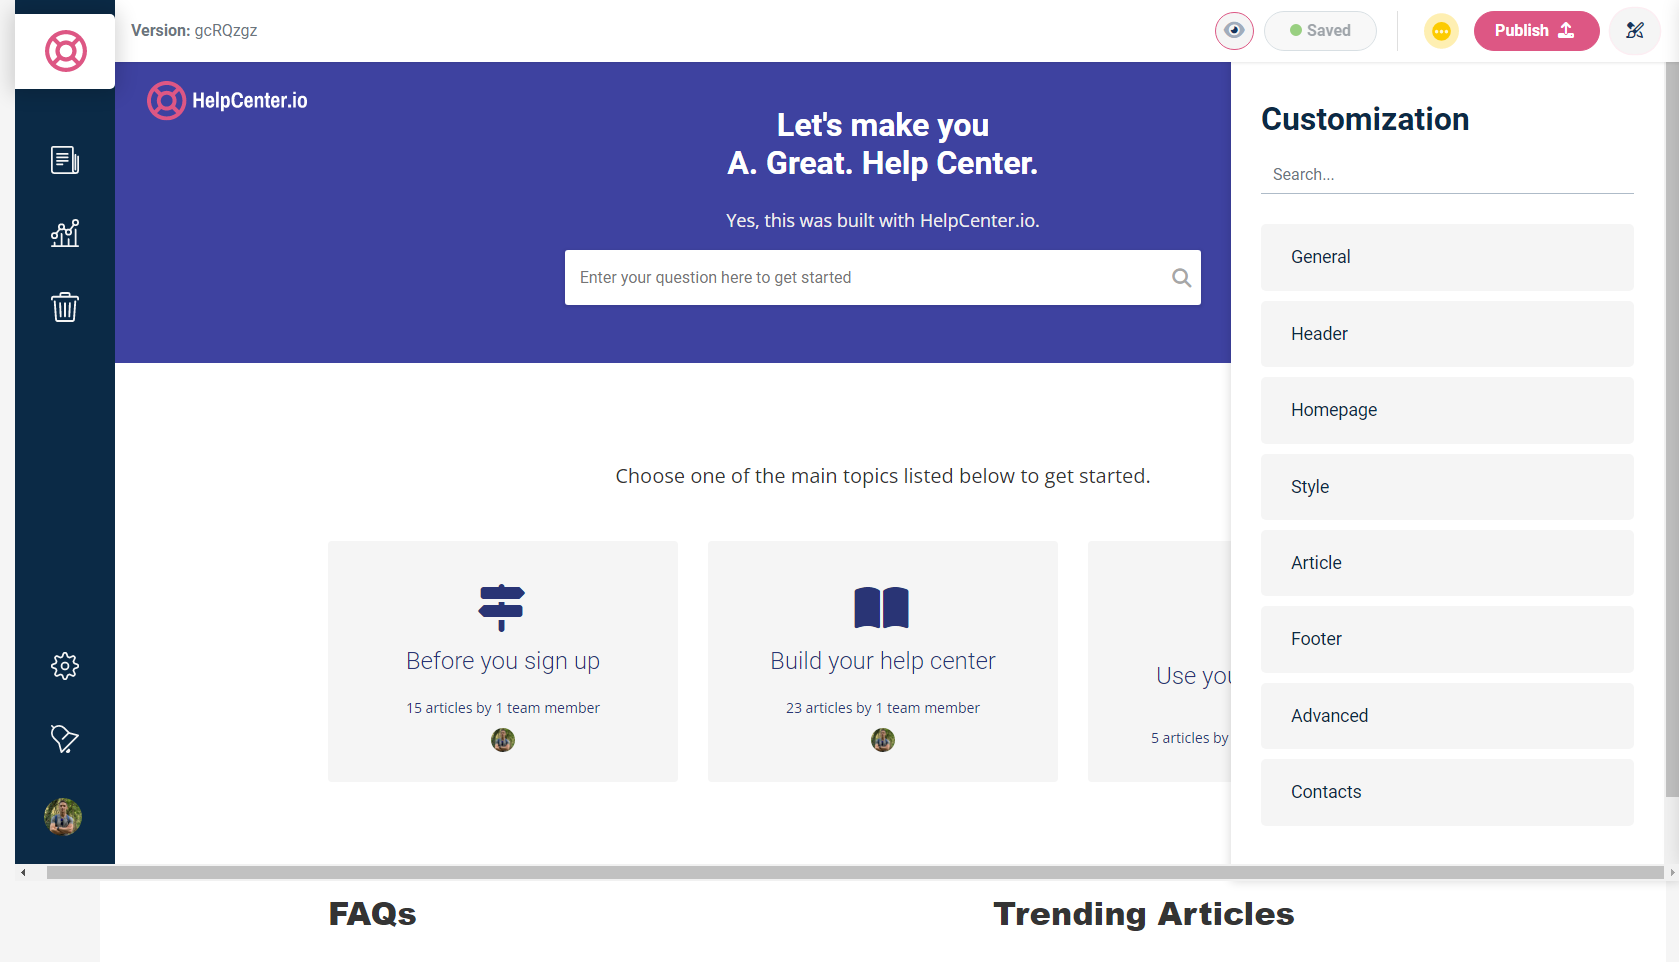 Release Note: Our best help center template editor just got even better